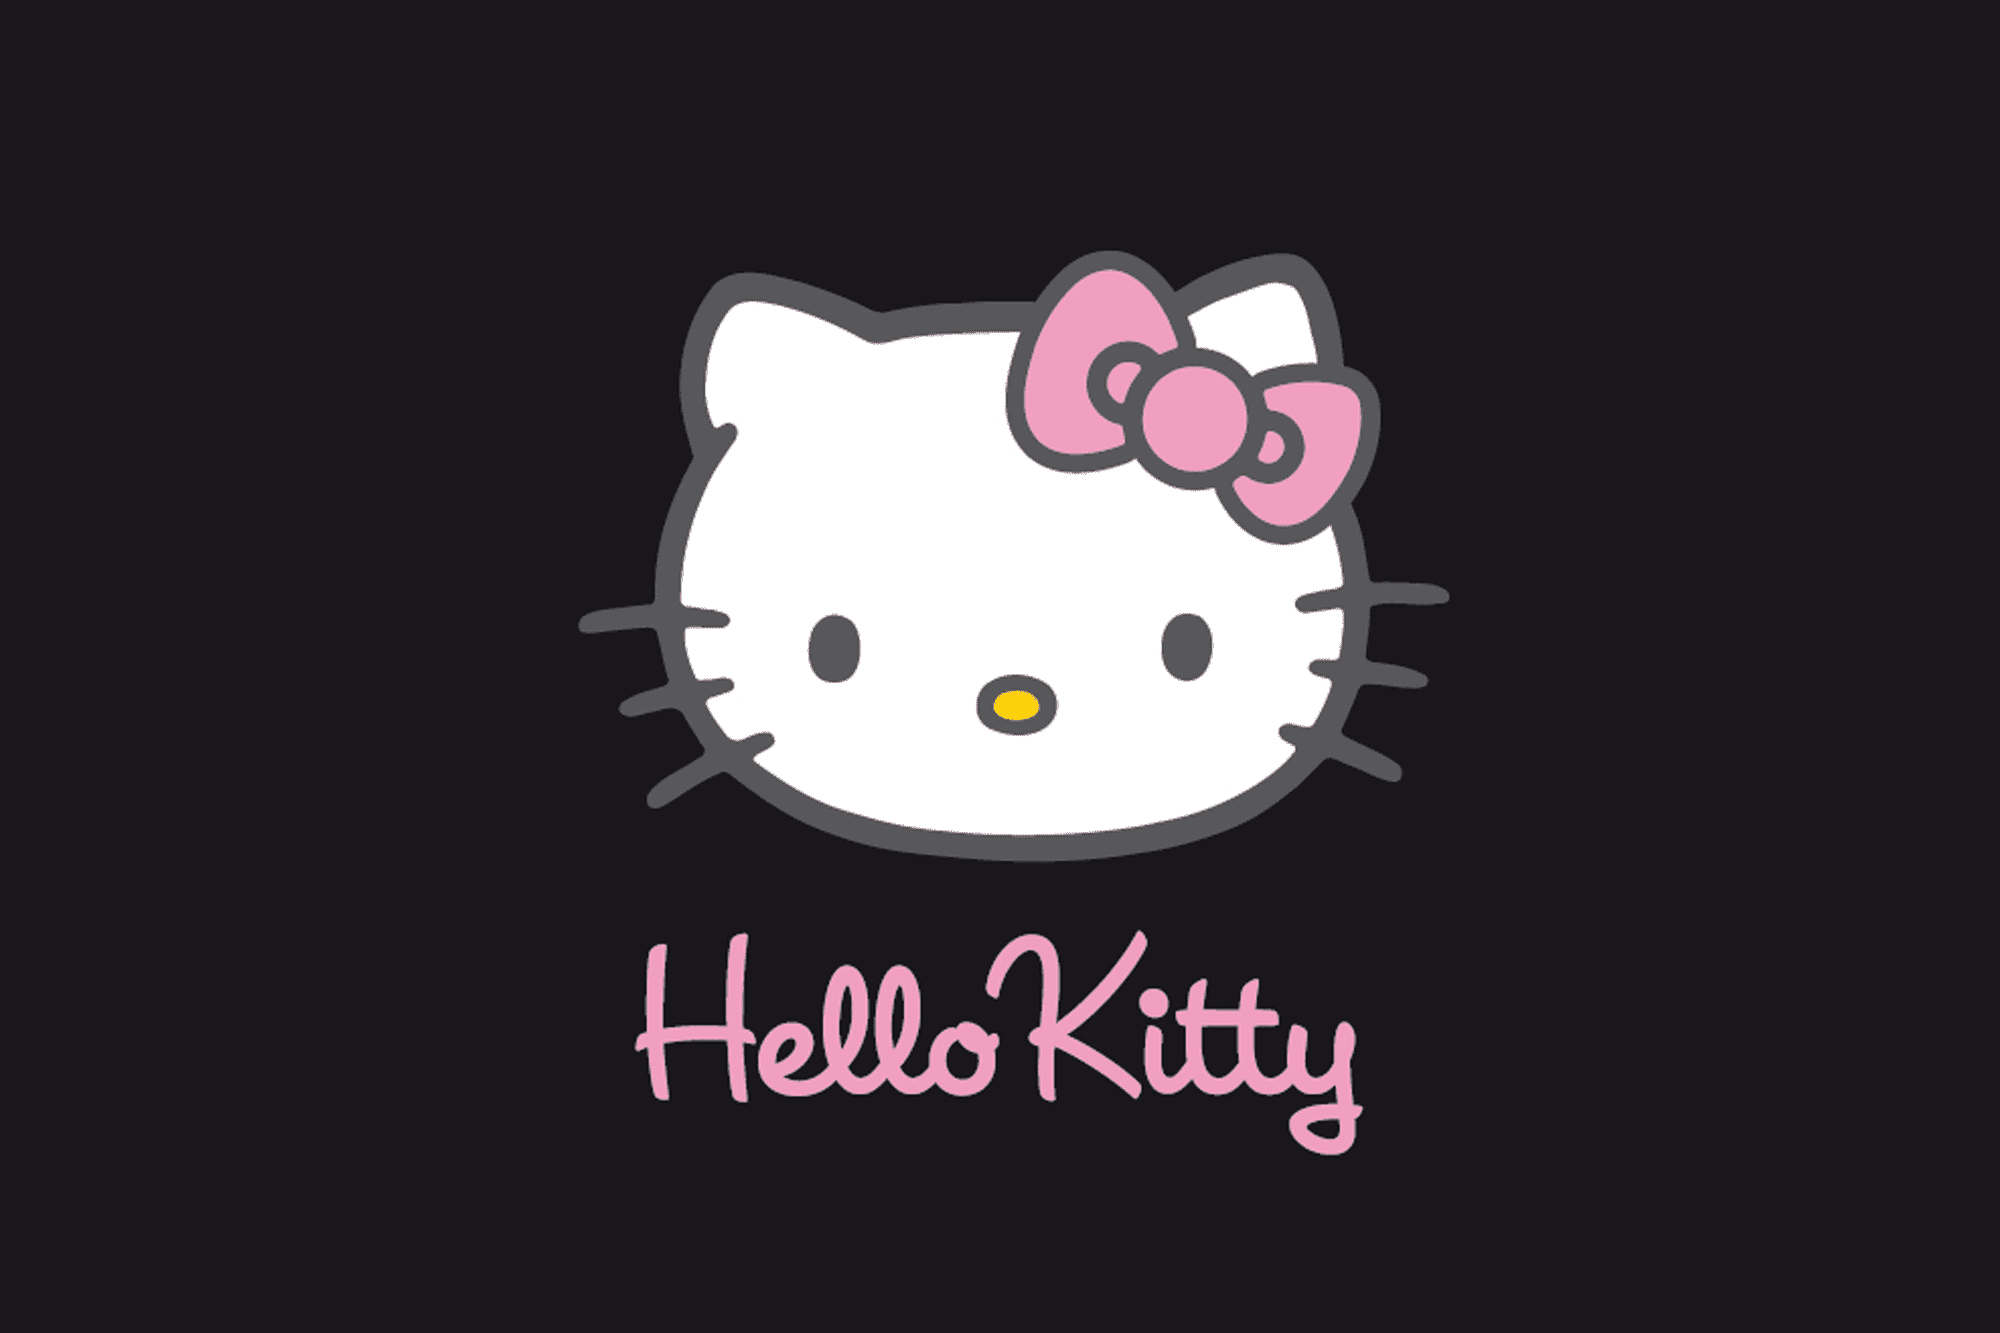 Hello Kitty with a pink bow on her head - Hello Kitty